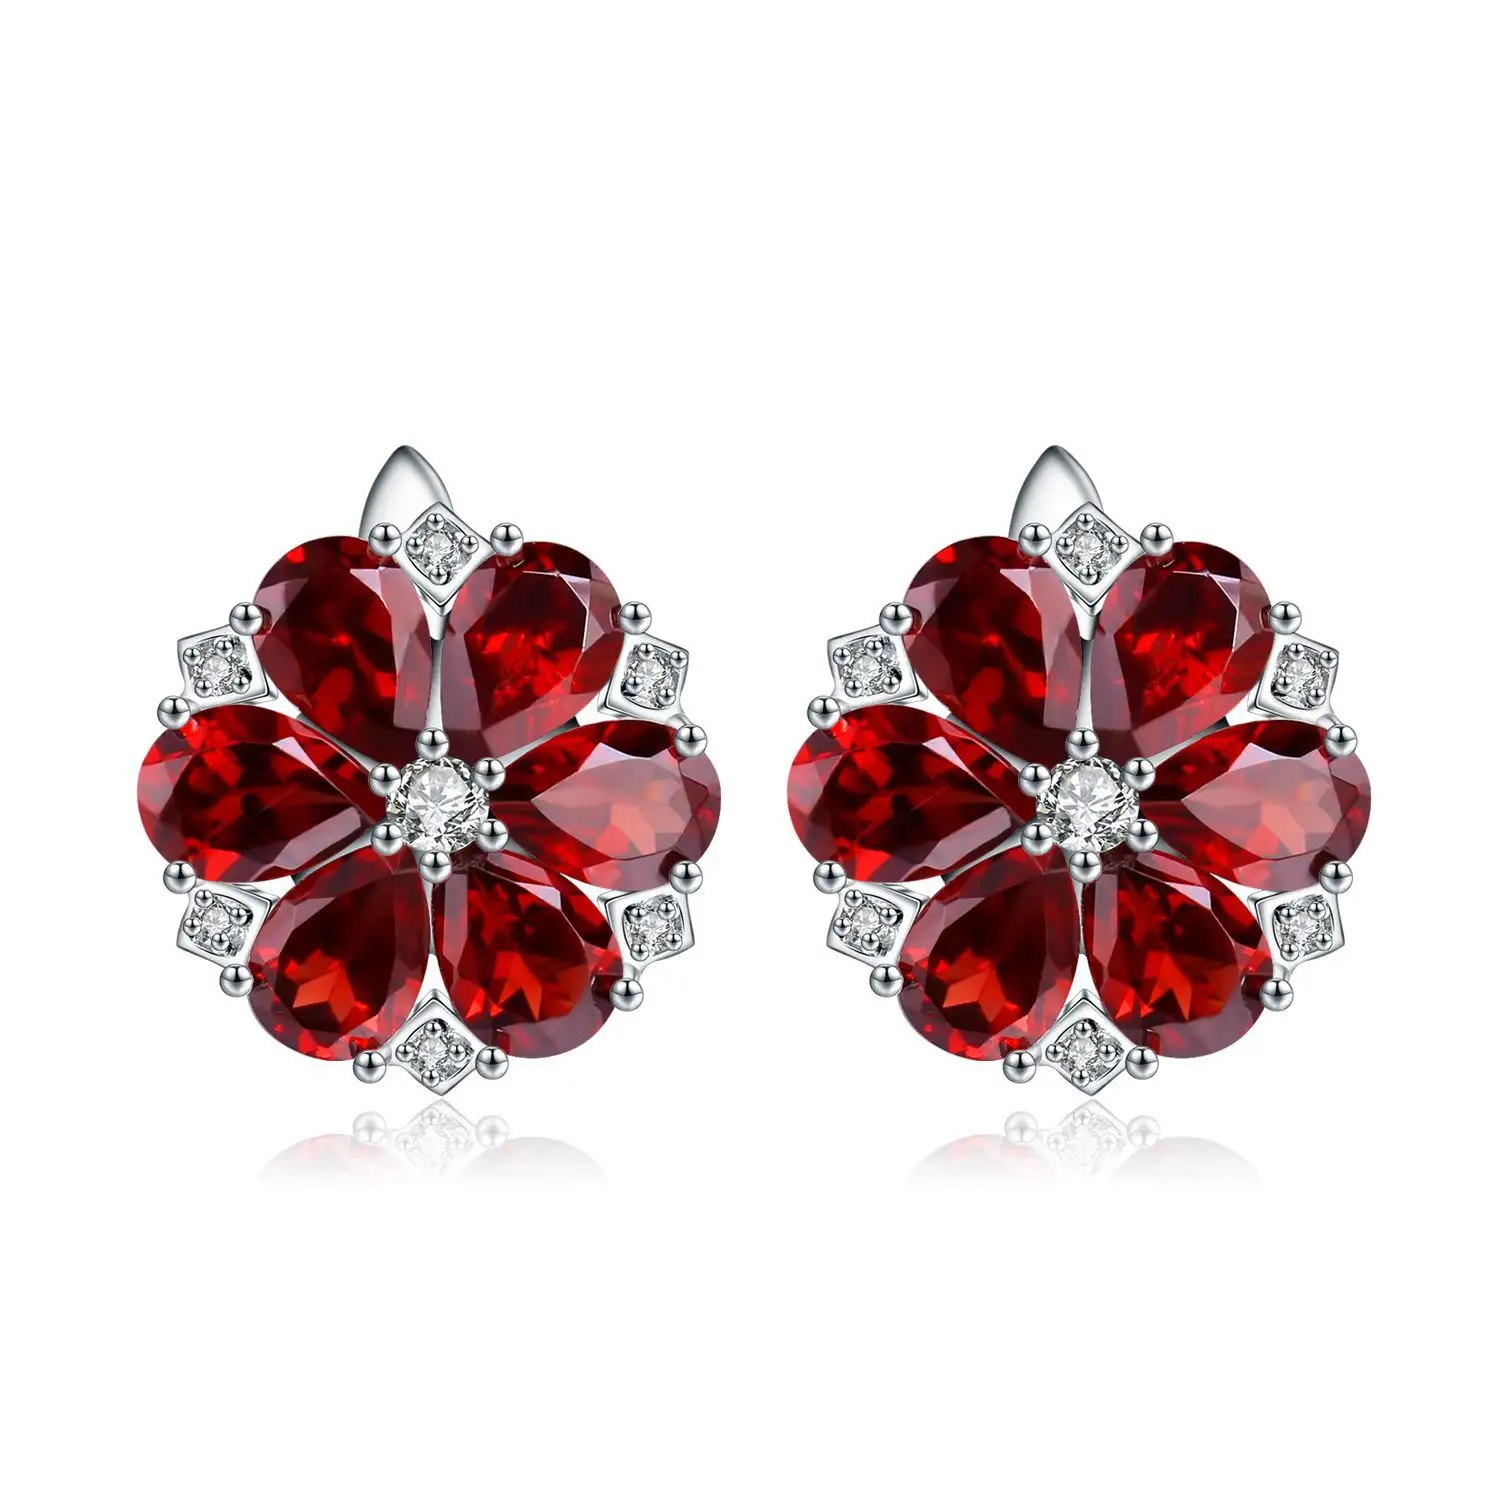 Light Luxury Jewelry Garnet S925 Silver Set With Natural Colored Jewelry Earrings